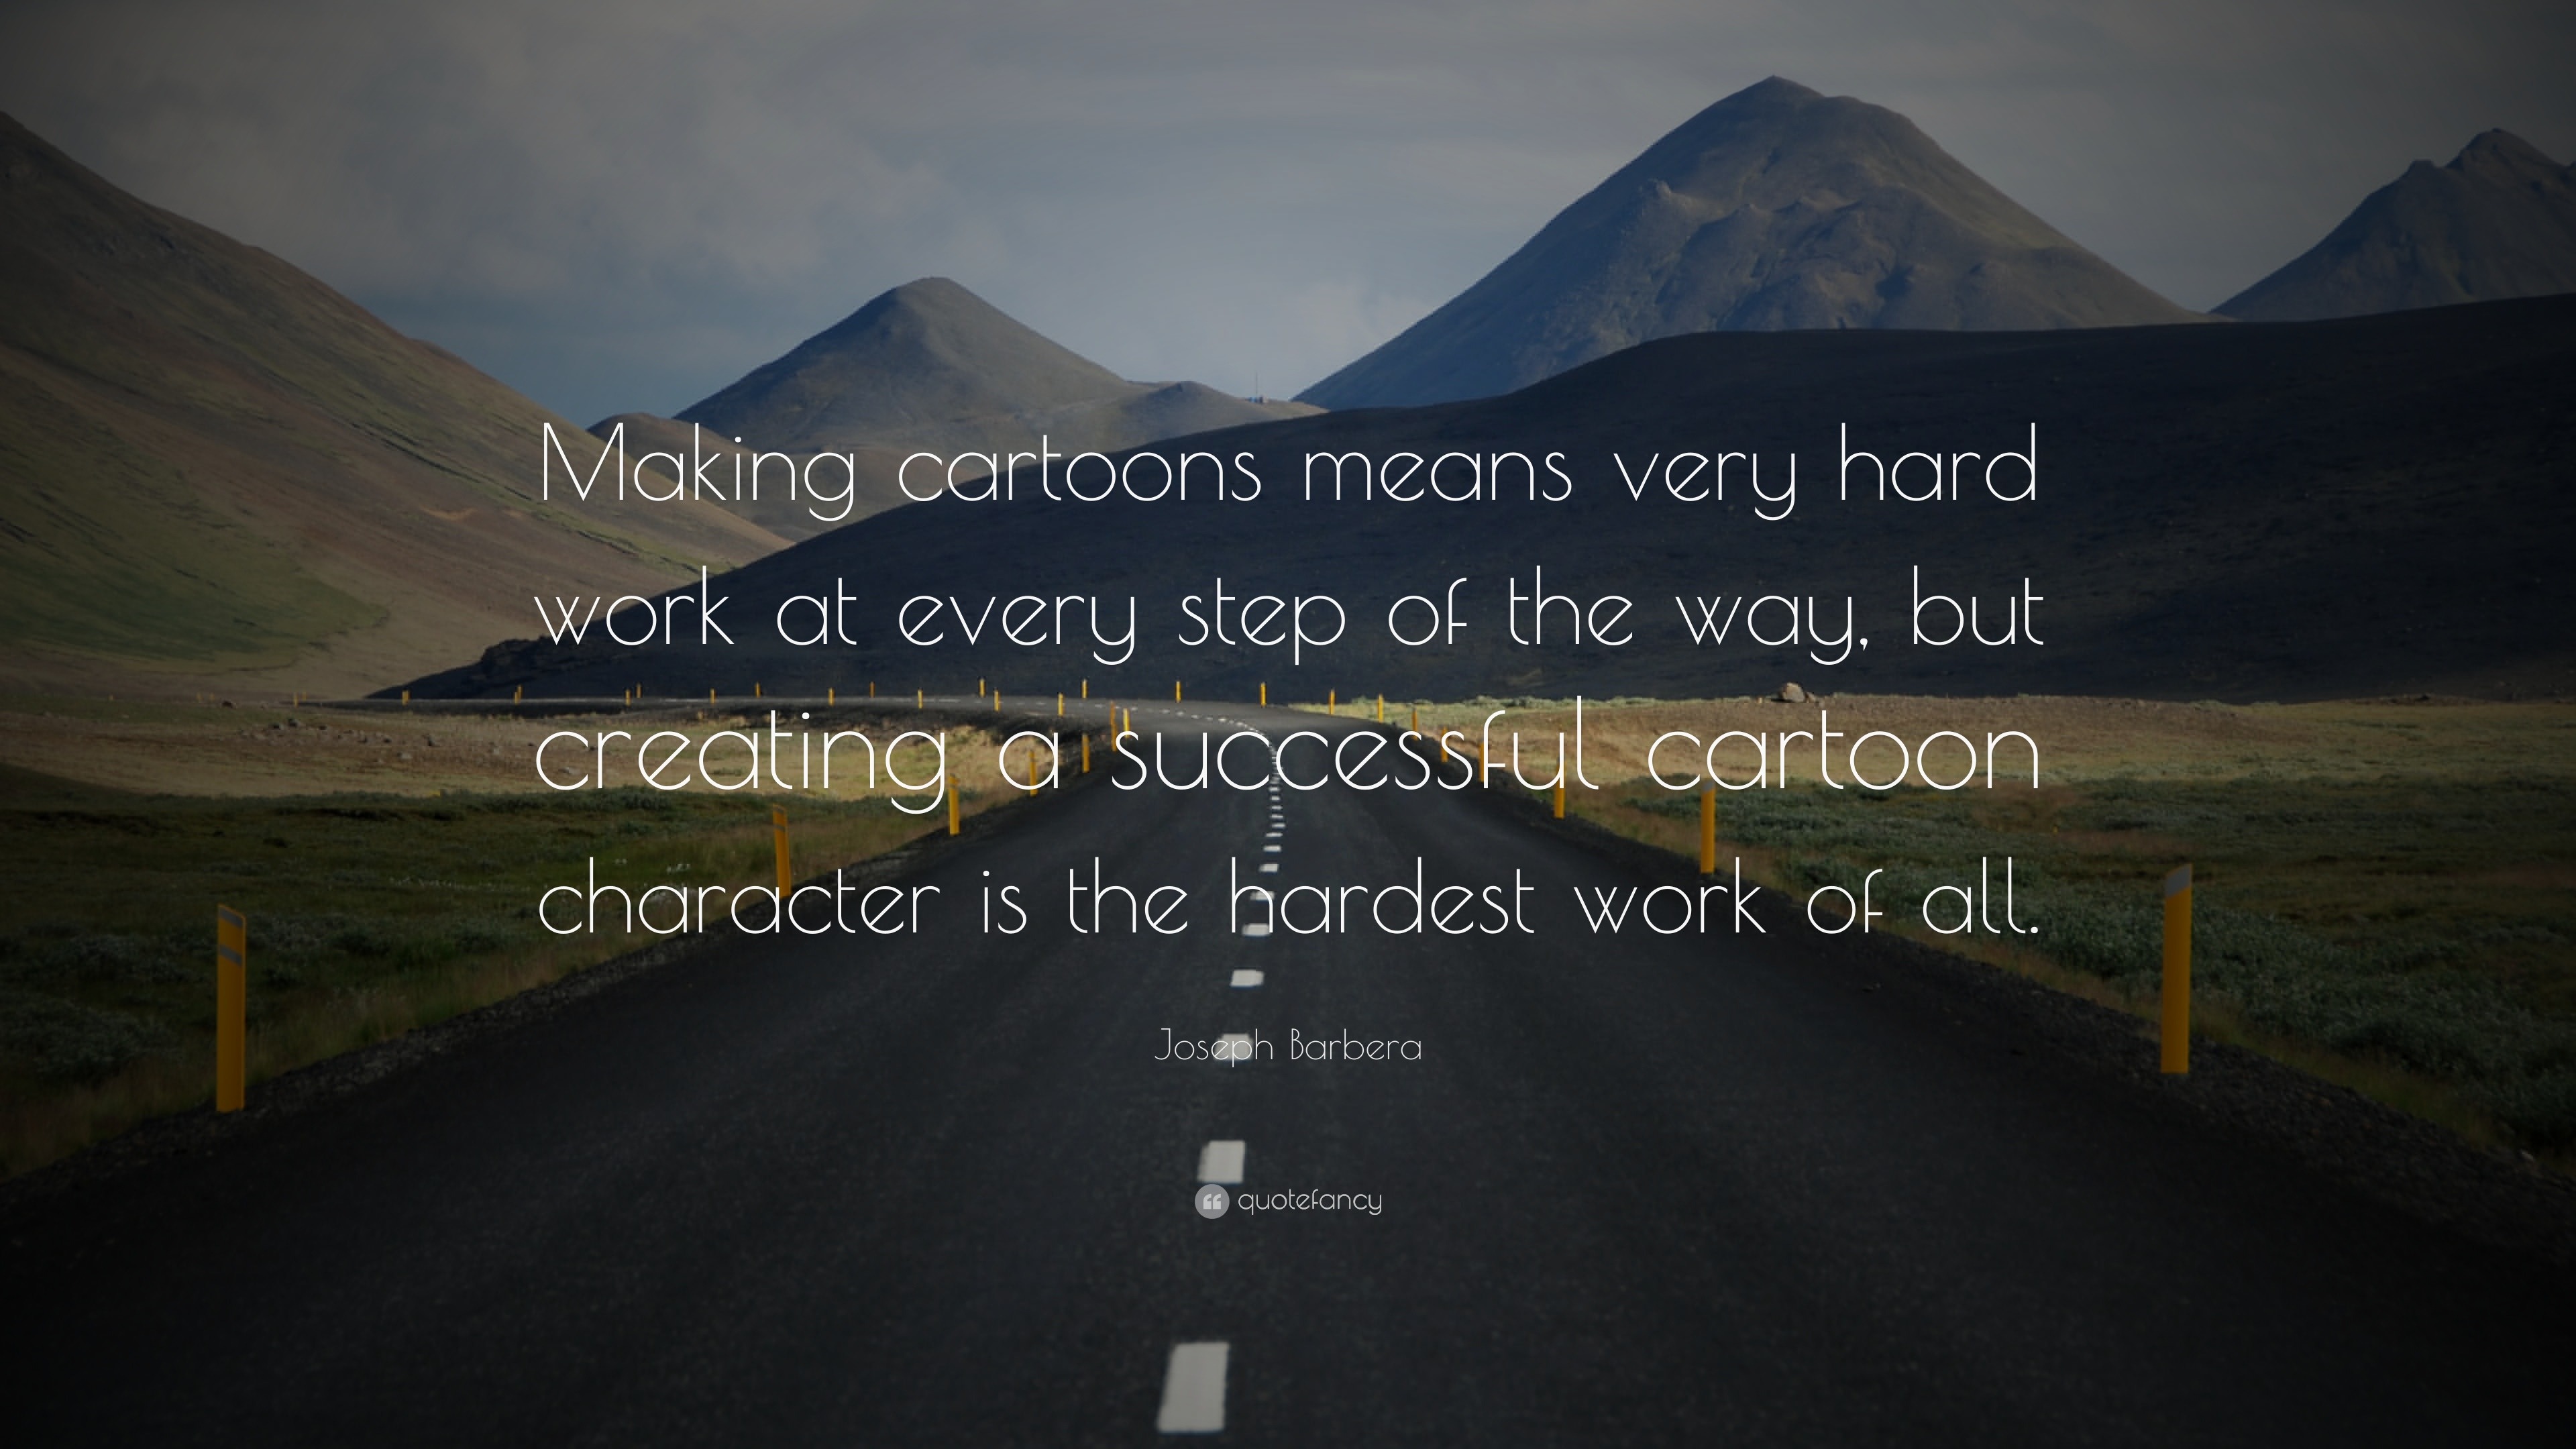 Joseph Barbera Quote: “Making cartoons means very hard work at every step  of the way, but creating a successful cartoon character is the hardes...”